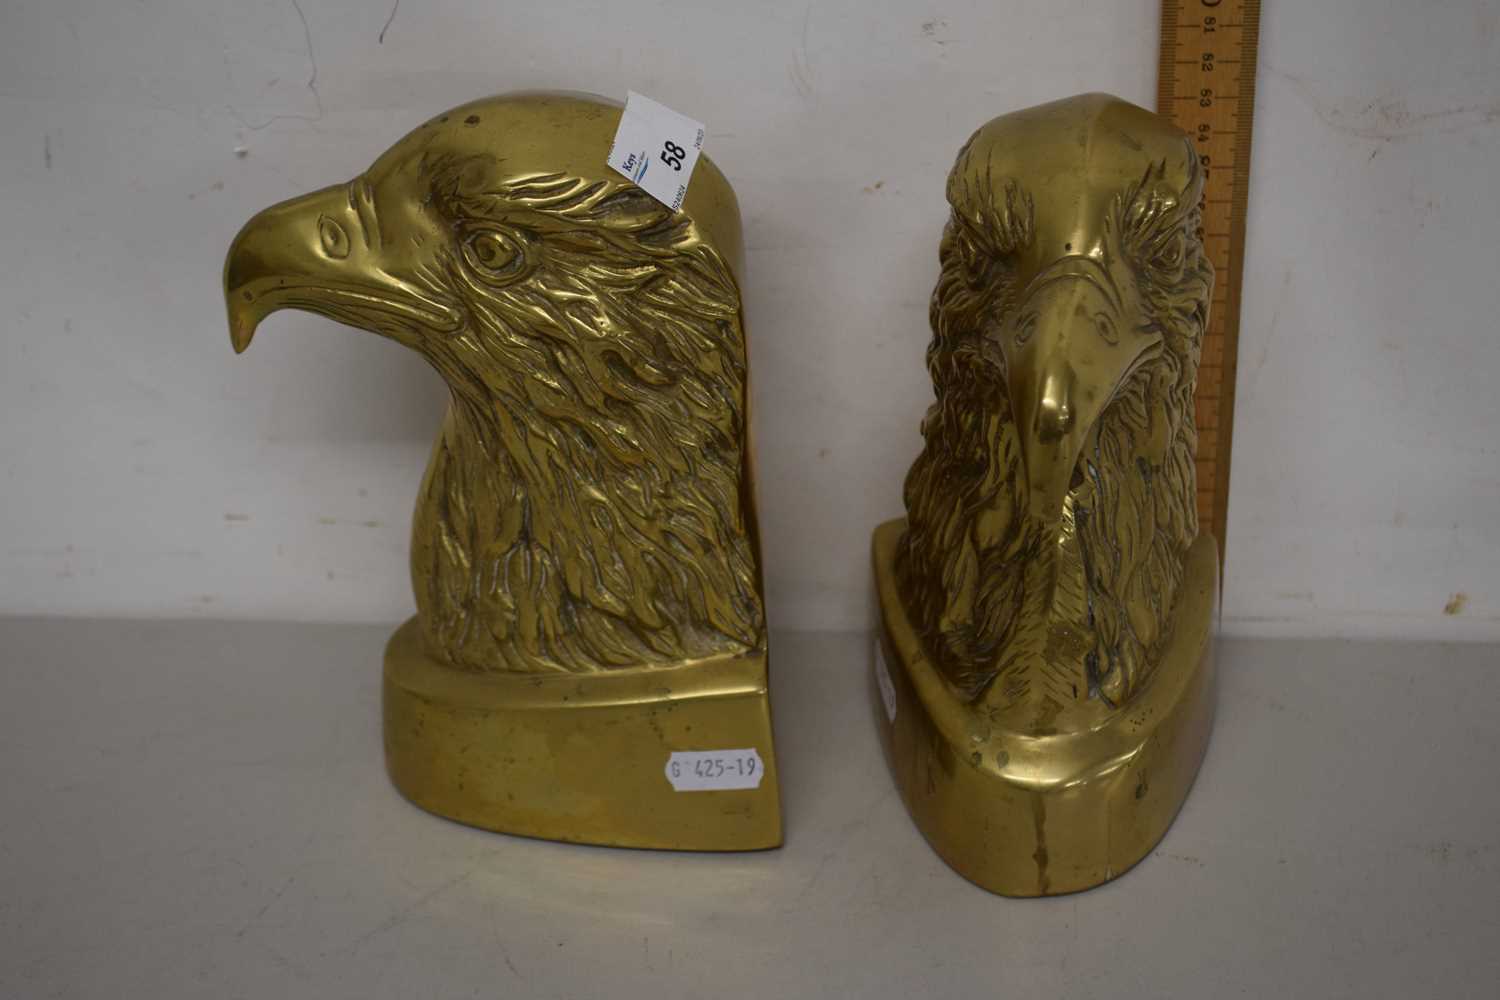 Lot 58 - Pair of brass eagles head bookends or doorstops